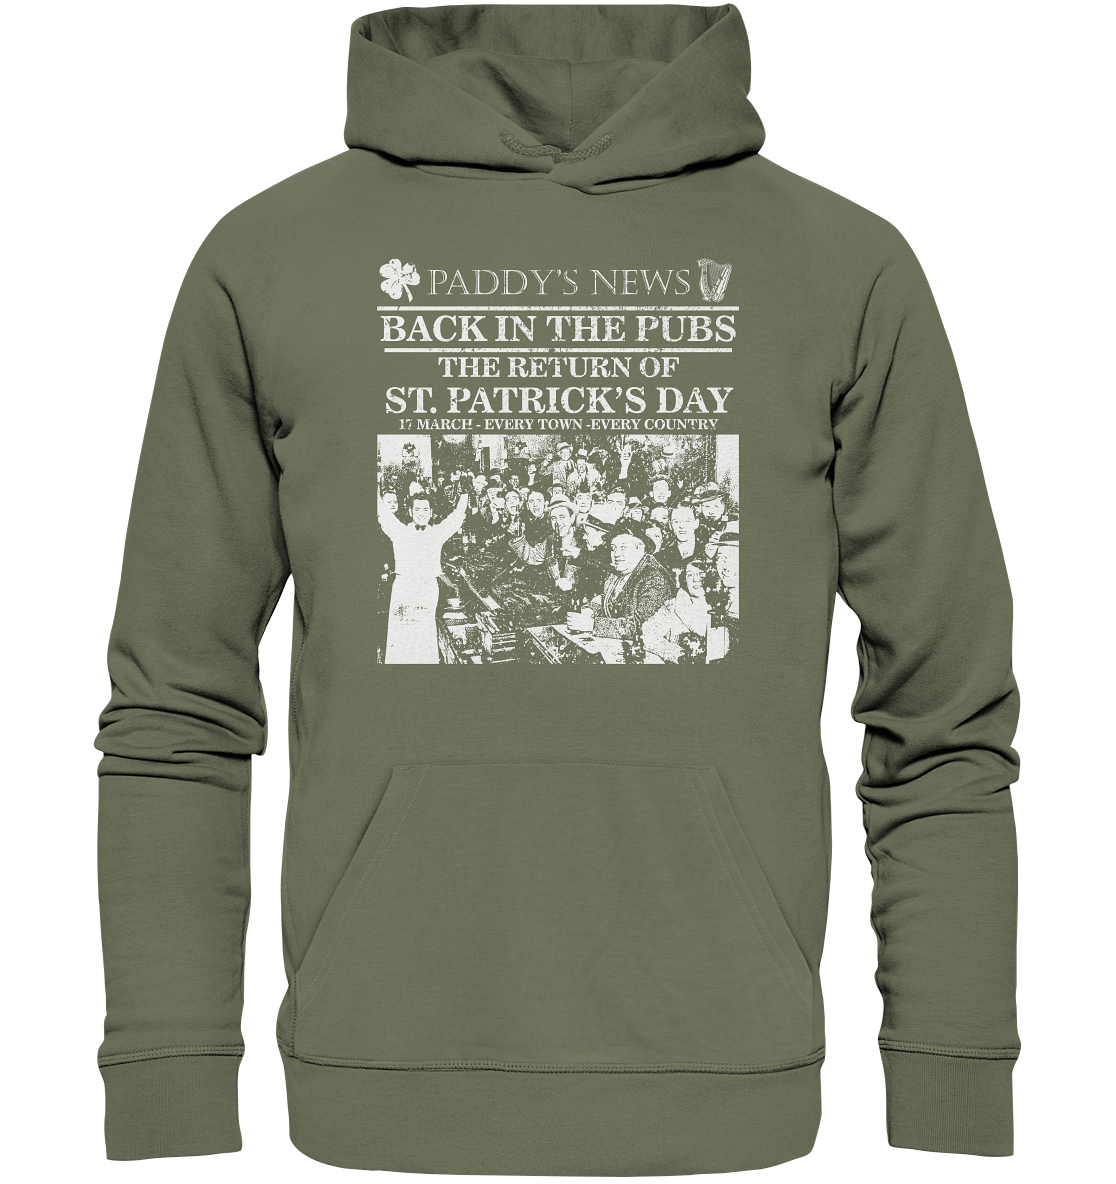 Back In The Pubs "The Return Of St. Patrick's Day" - Premium Unisex Hoodie